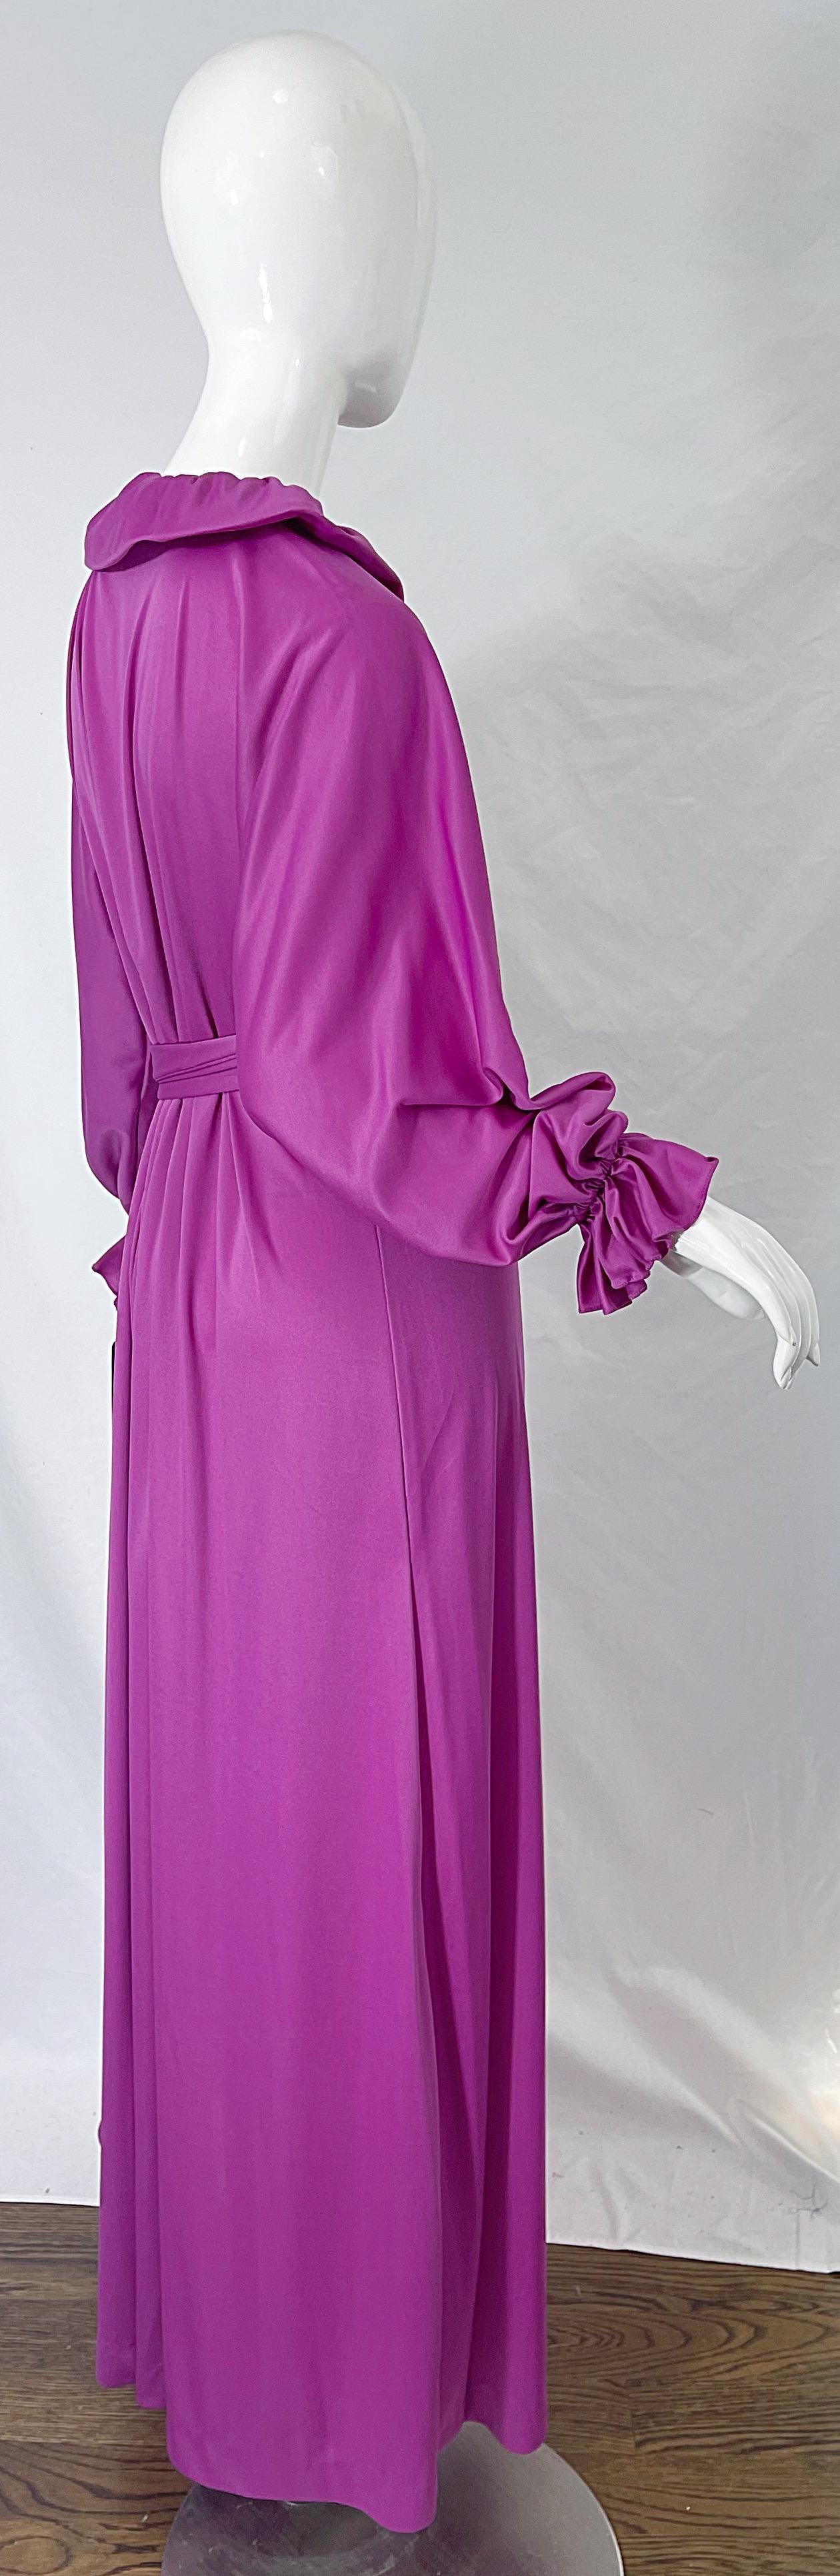 Women's NWT 1970s Halston IV Purple / Pink One Size Fits All Vintage 70s Maxi Dress For Sale